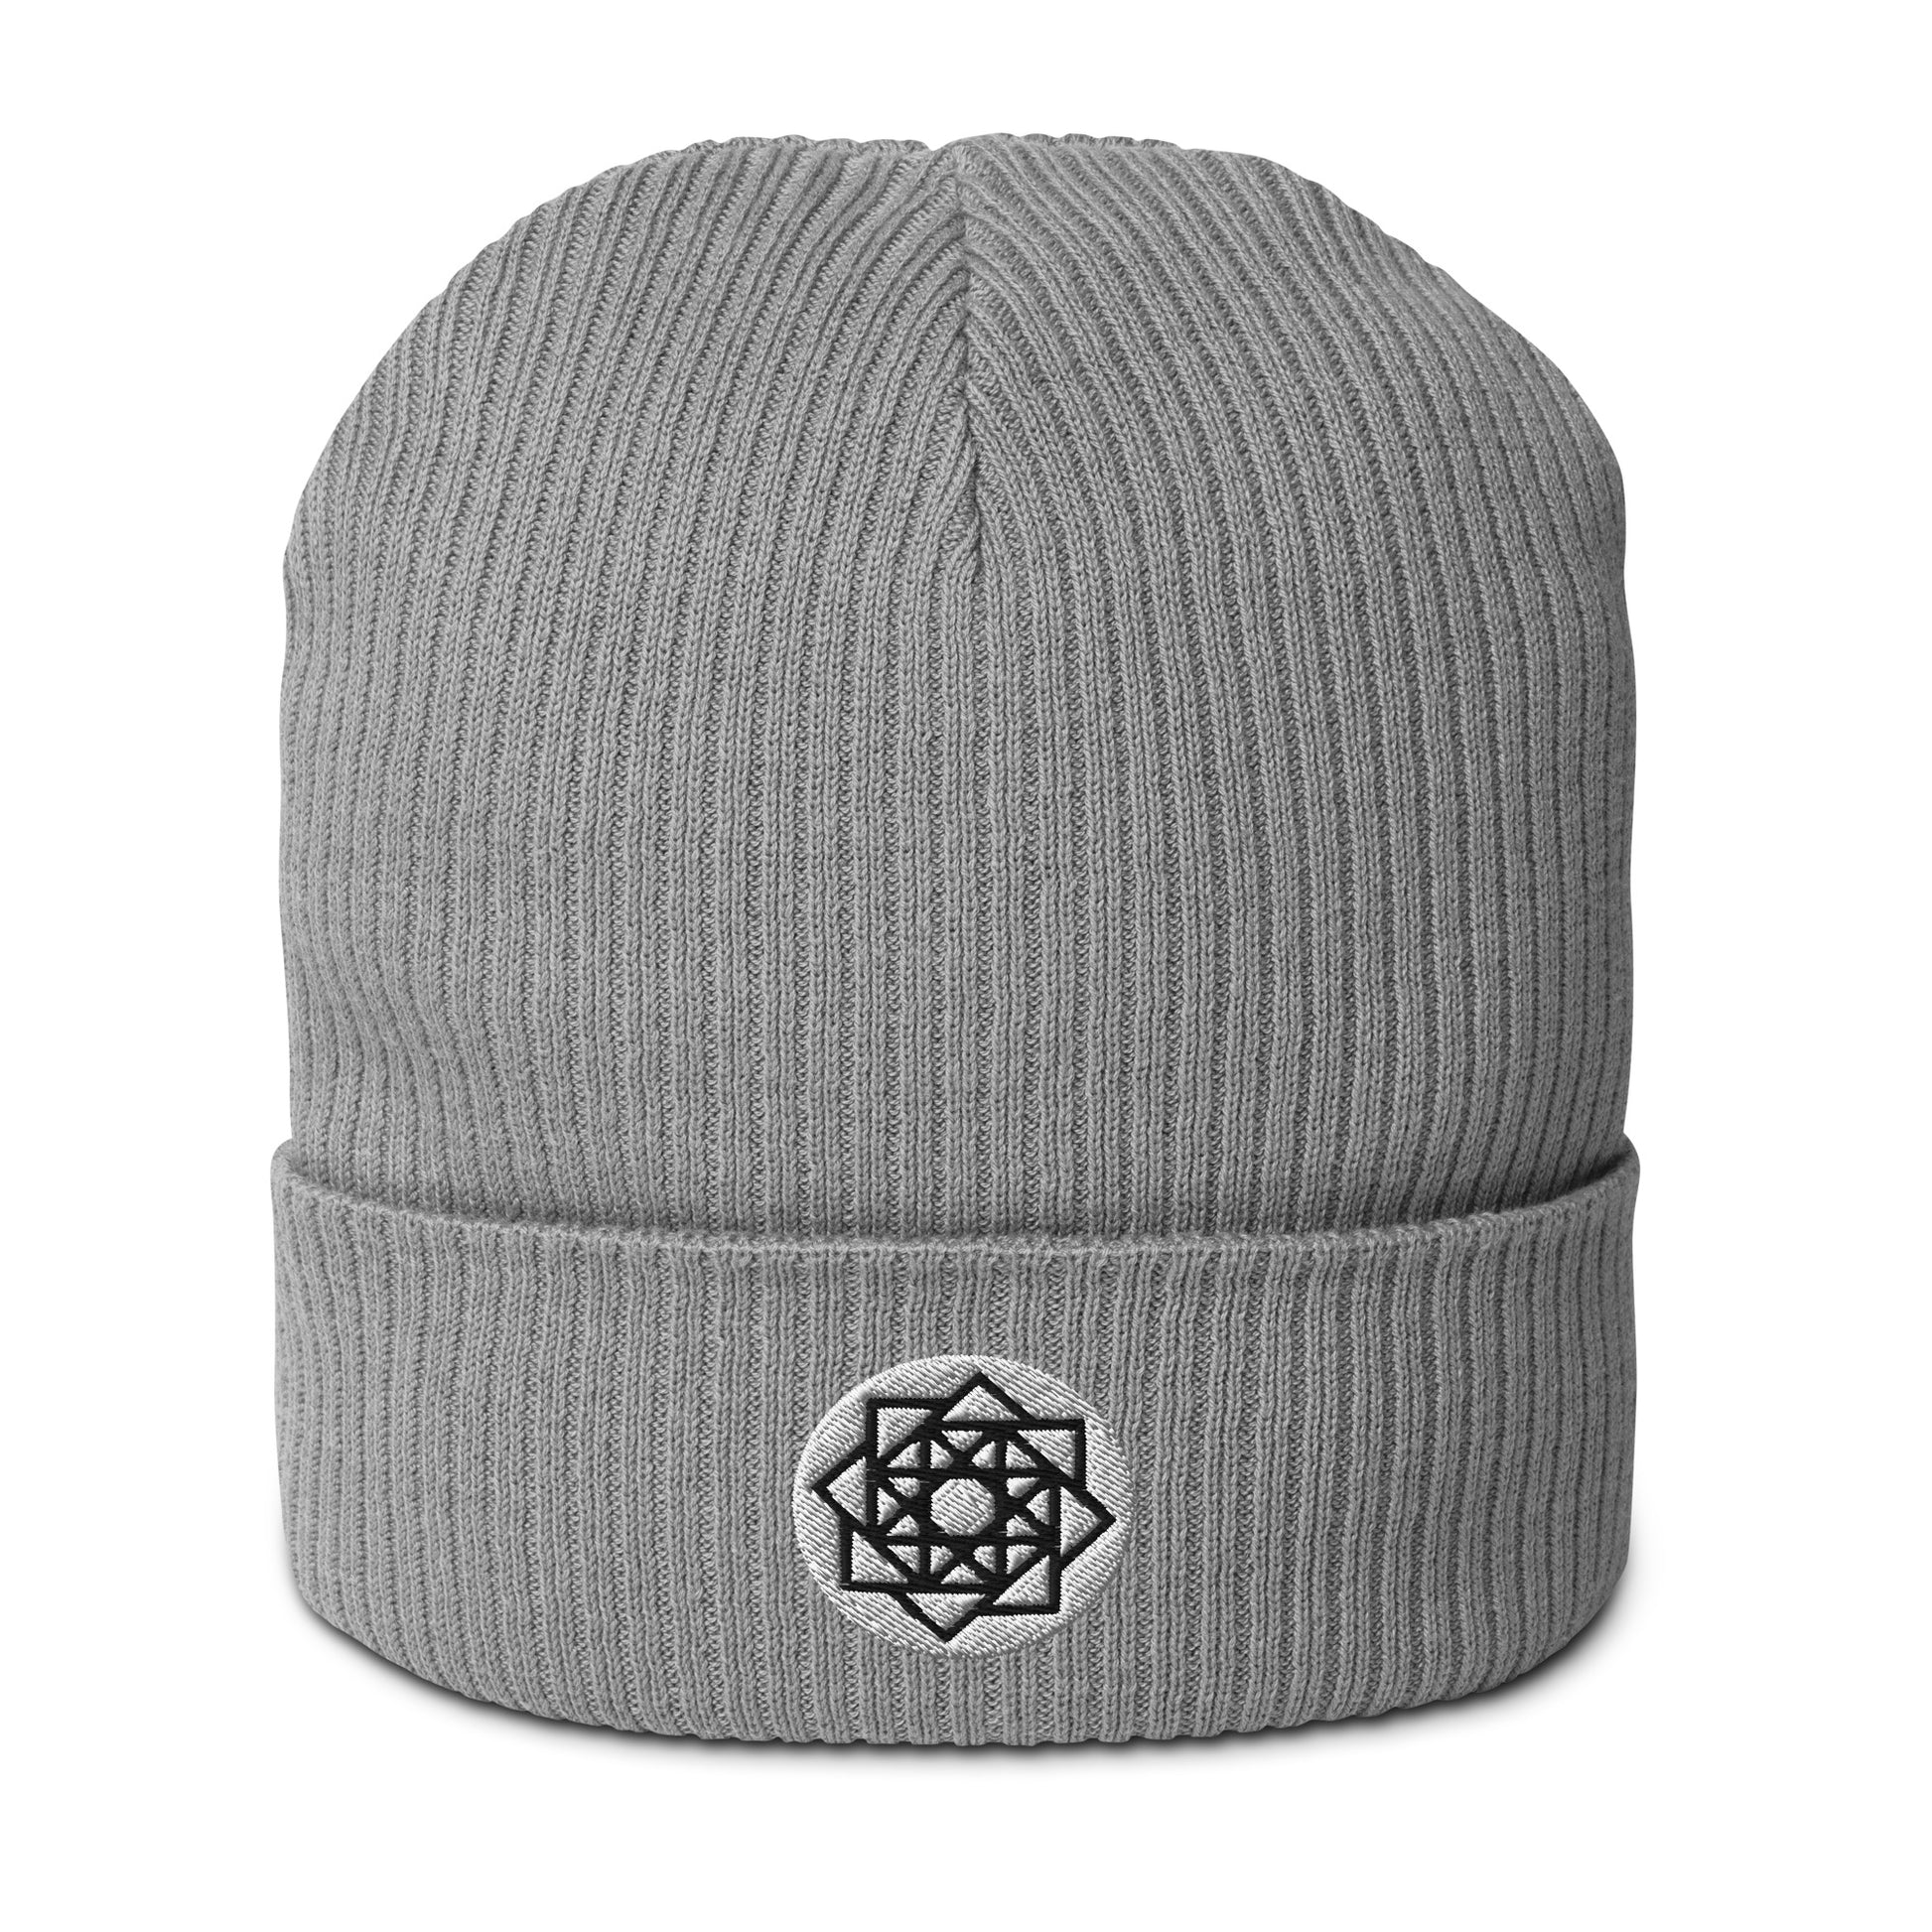 Allow me to introduce our Square Matrix Beanie in Cloudy Gray, a testament to cosmic order and mathematical elegance. Woven from the finest organic cotton and adorned with the precise geometry of the Square Matrix symbol, this beanie transcends mere headwear.